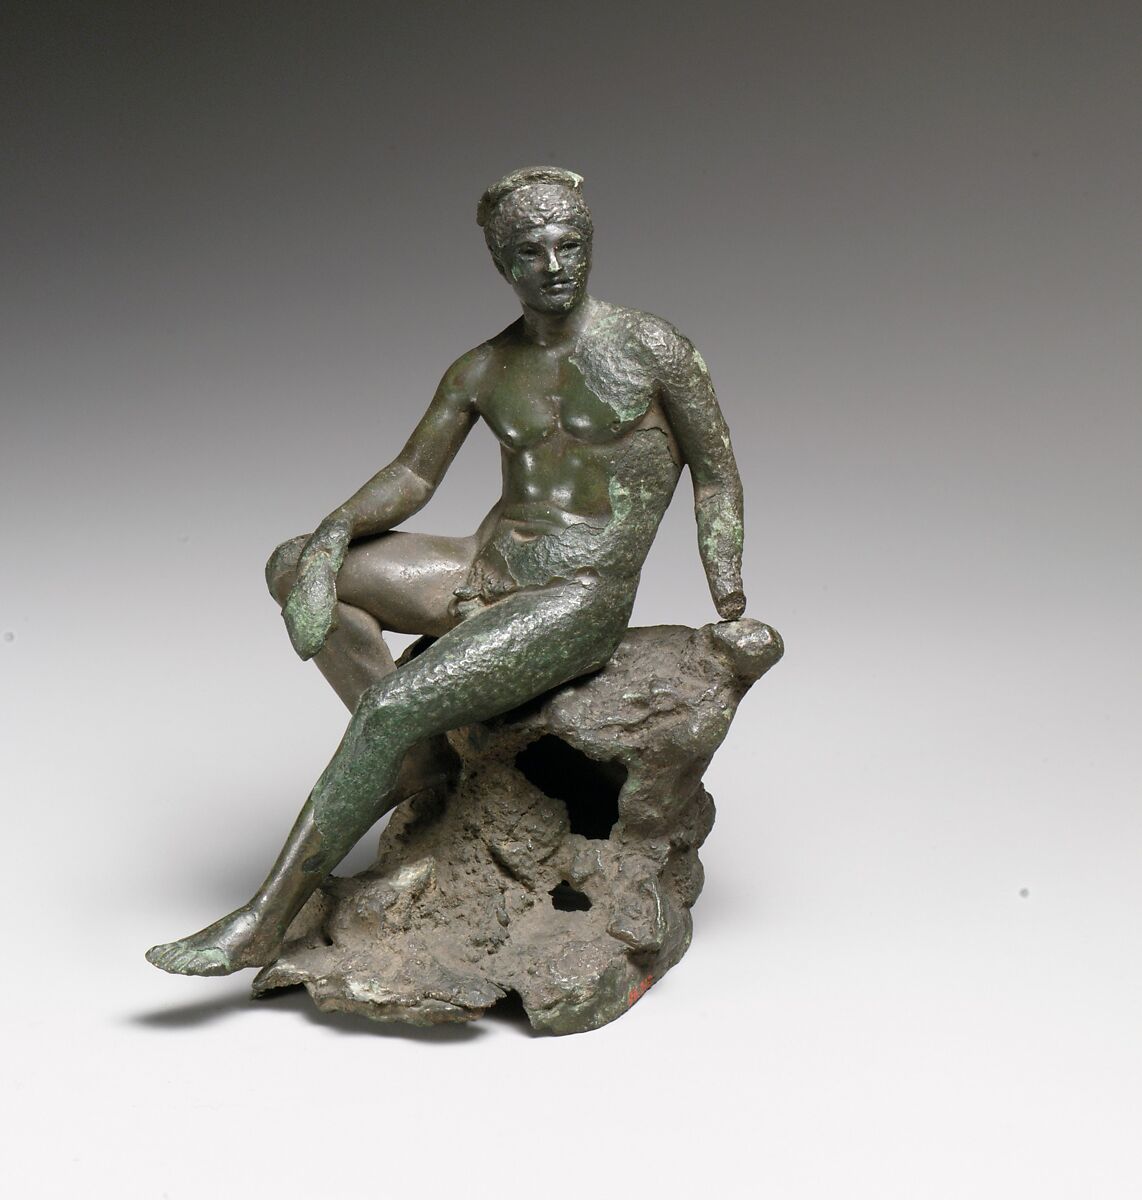 Bronze statuette of Hermes seated on a rock, Bronze, Roman 